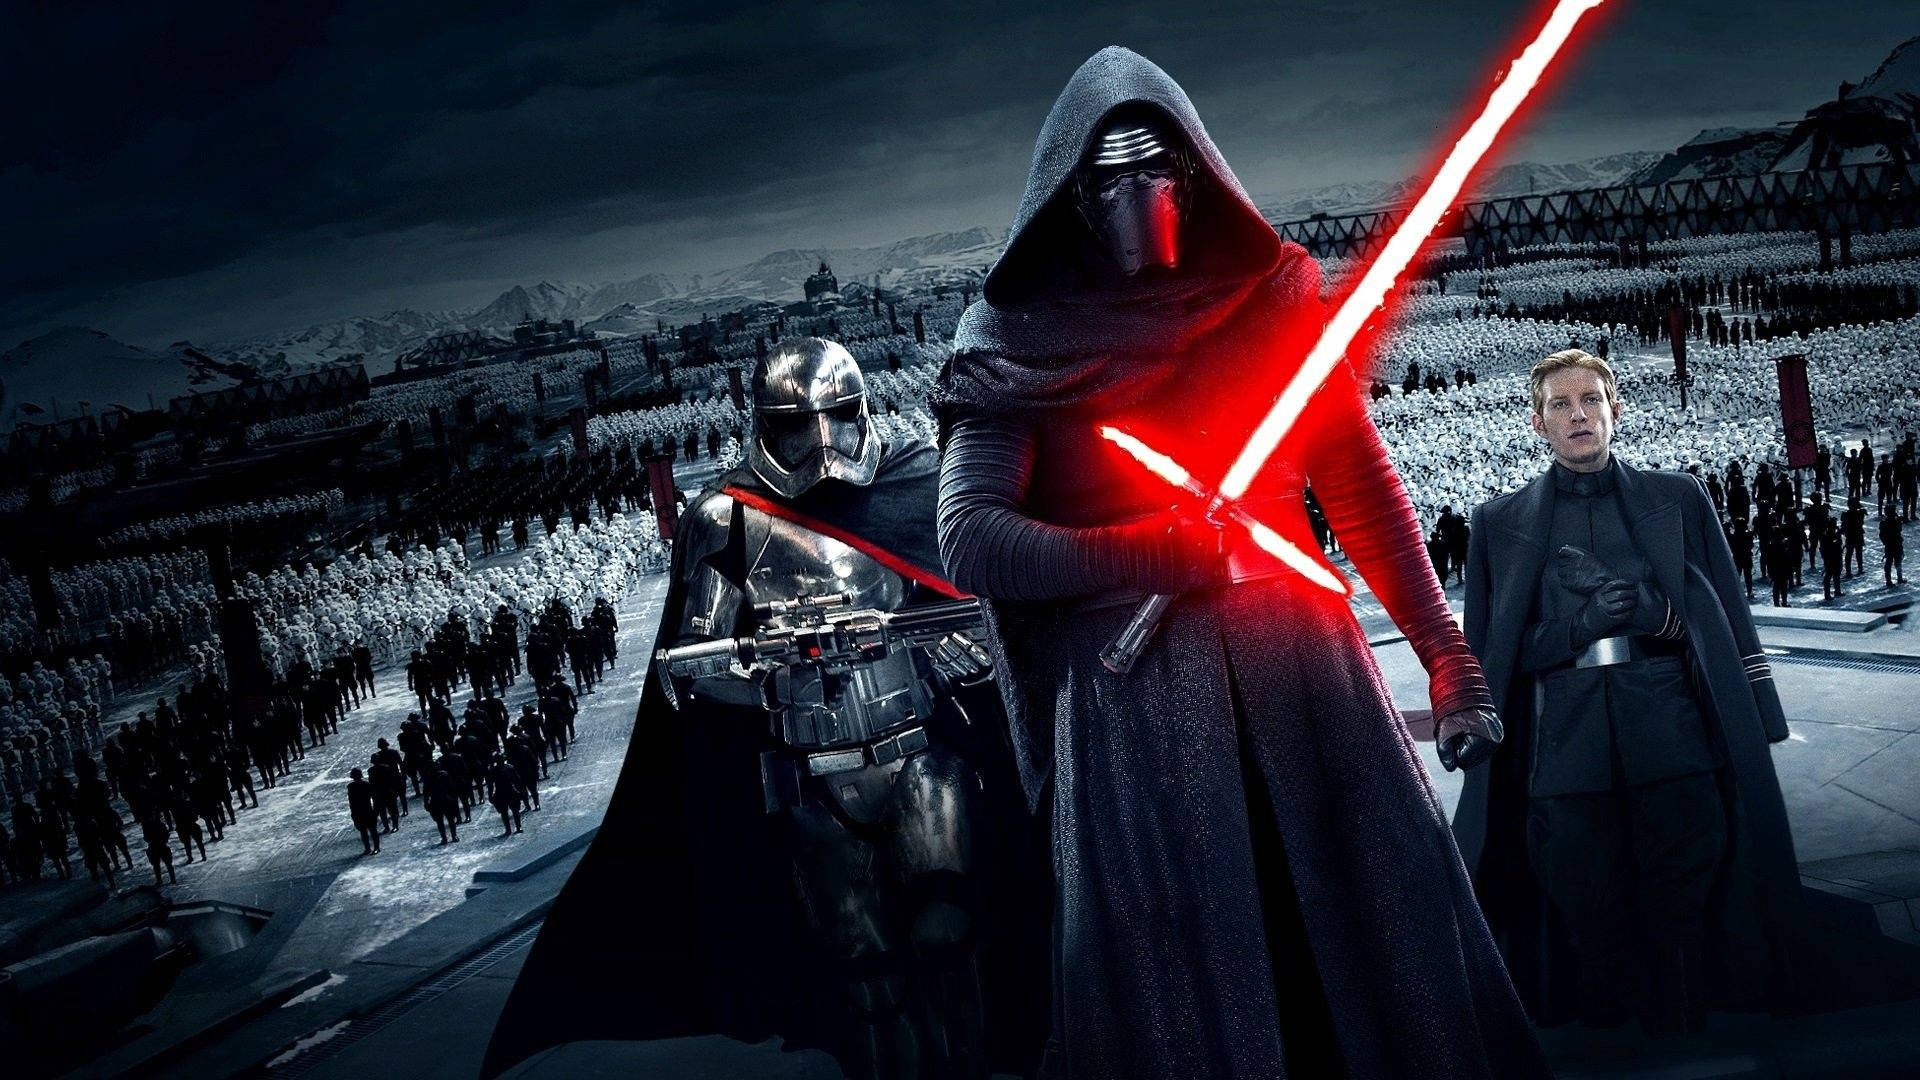 Kylo Ren standing against the forces of the dark side Wallpaper